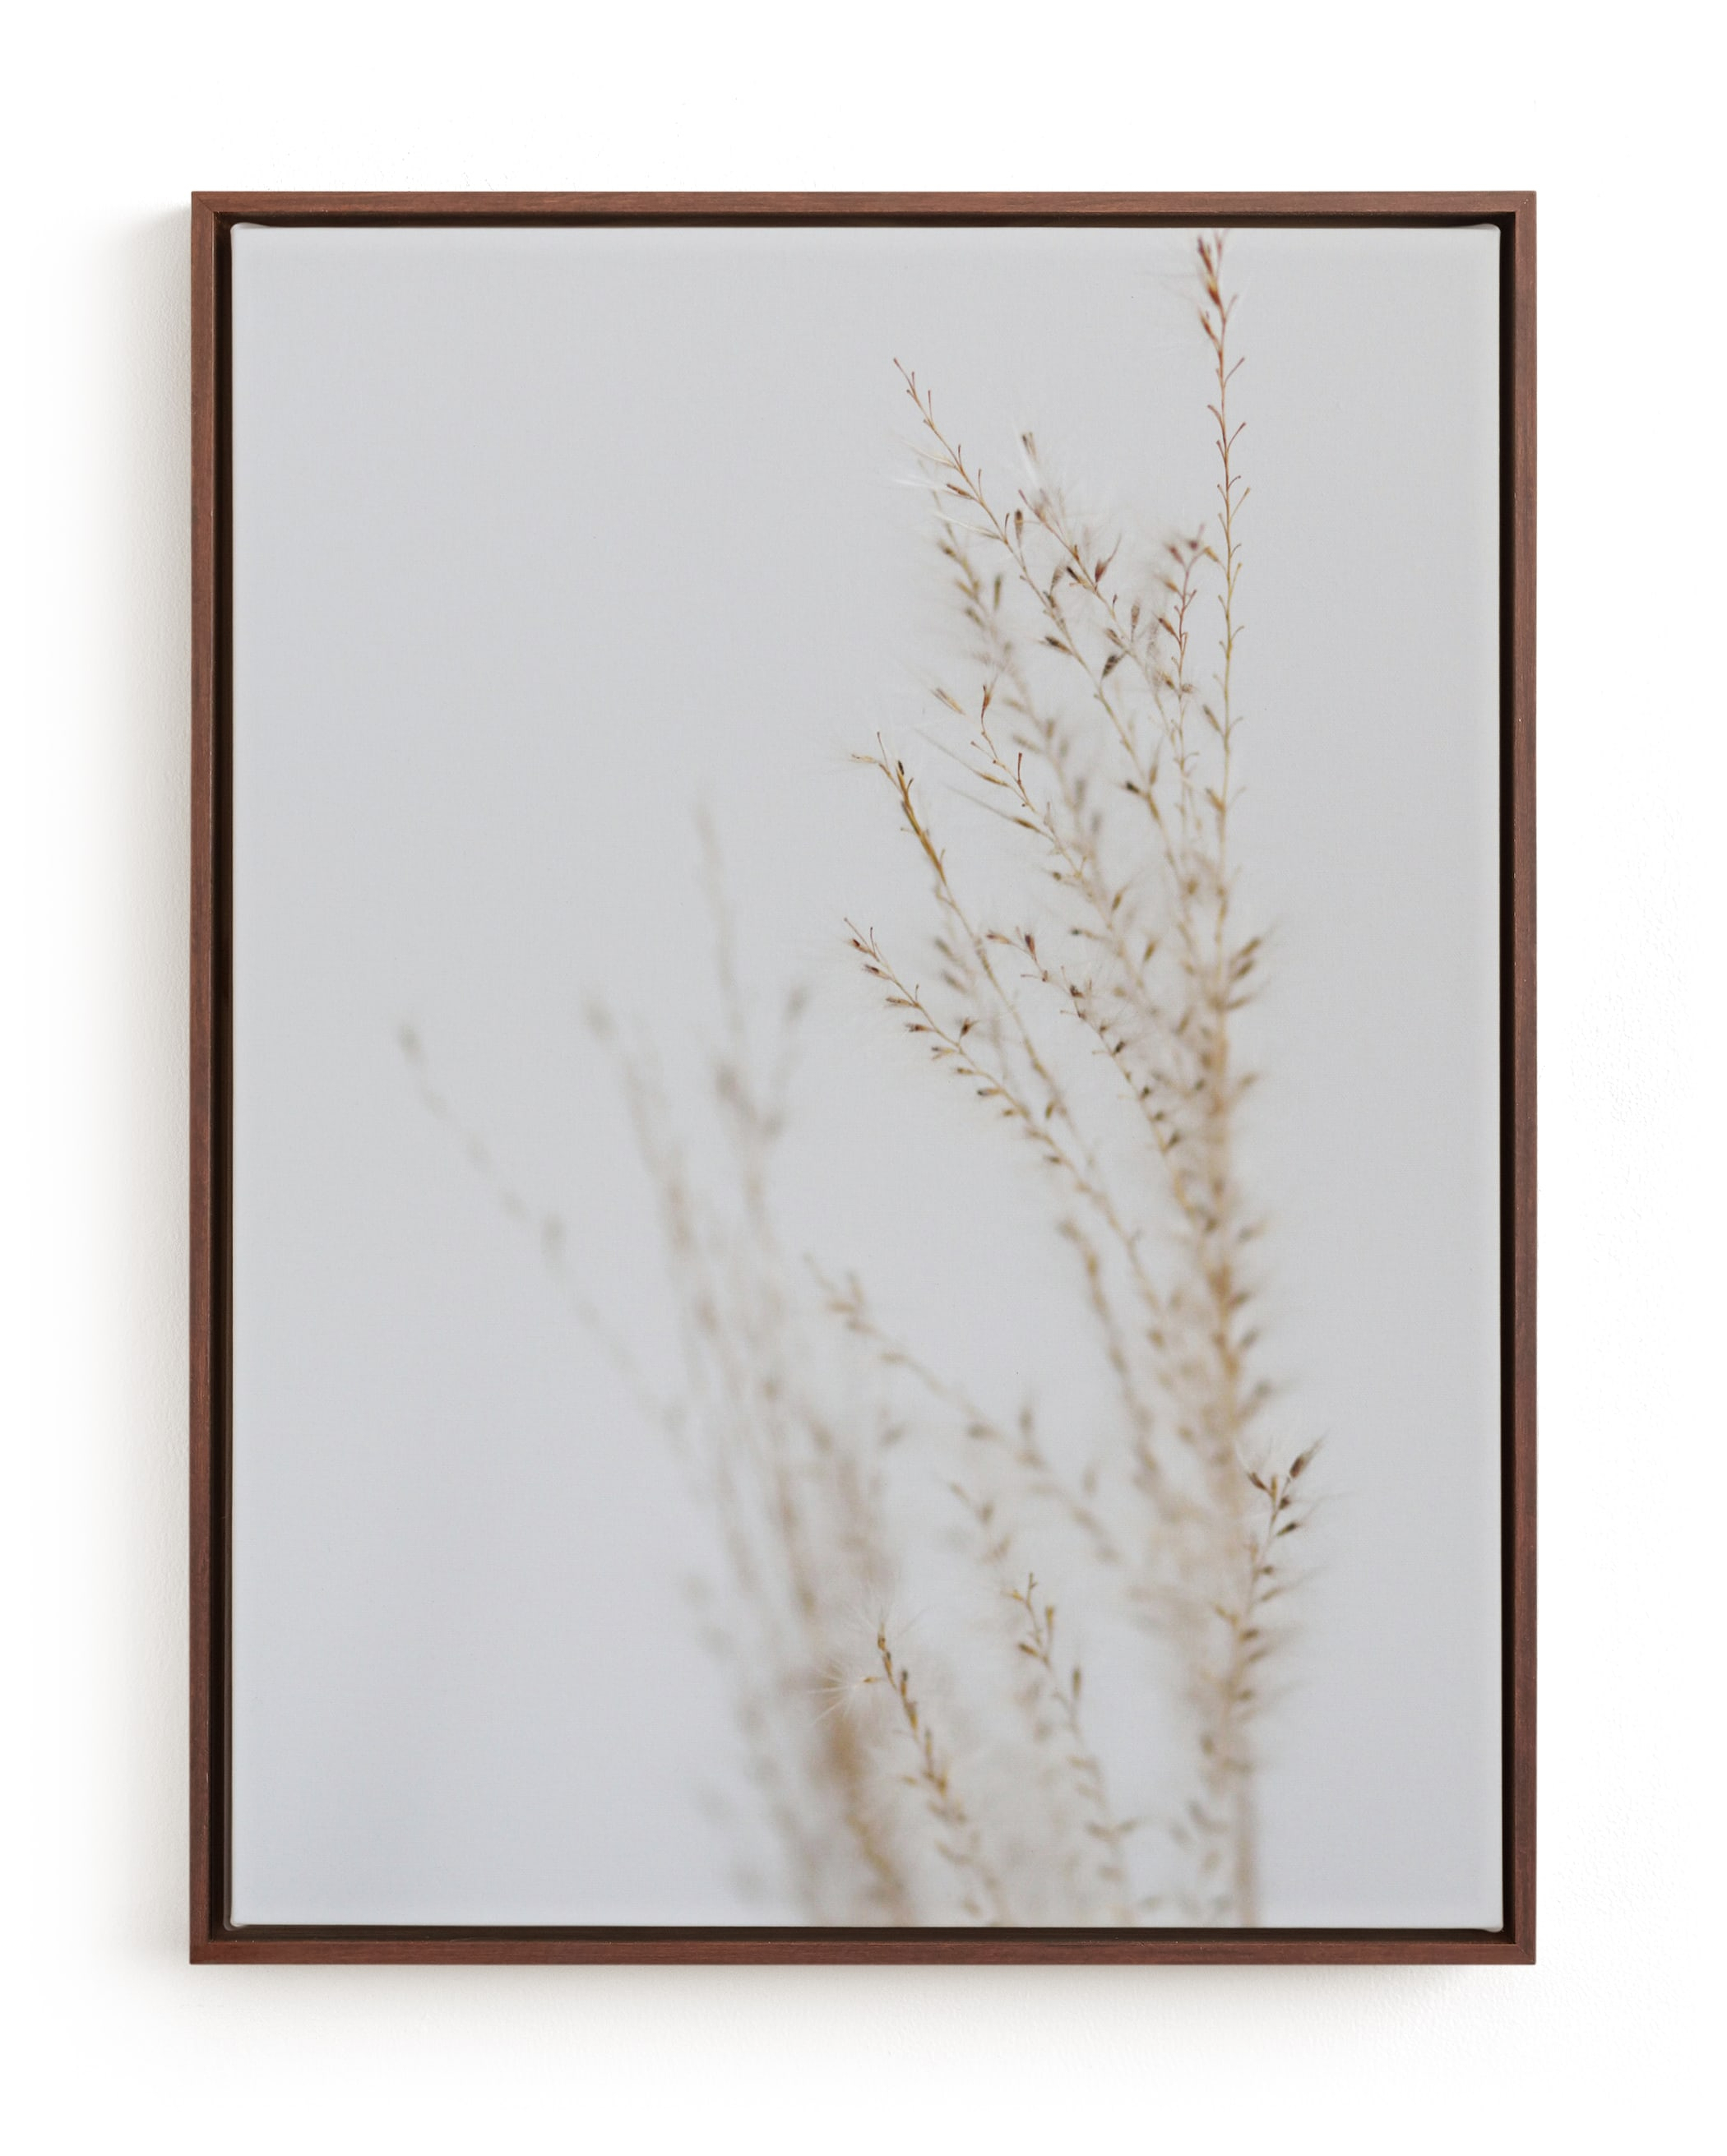 Ghosted Neutrals 3 Limited Edition Fine Art Print - Minted